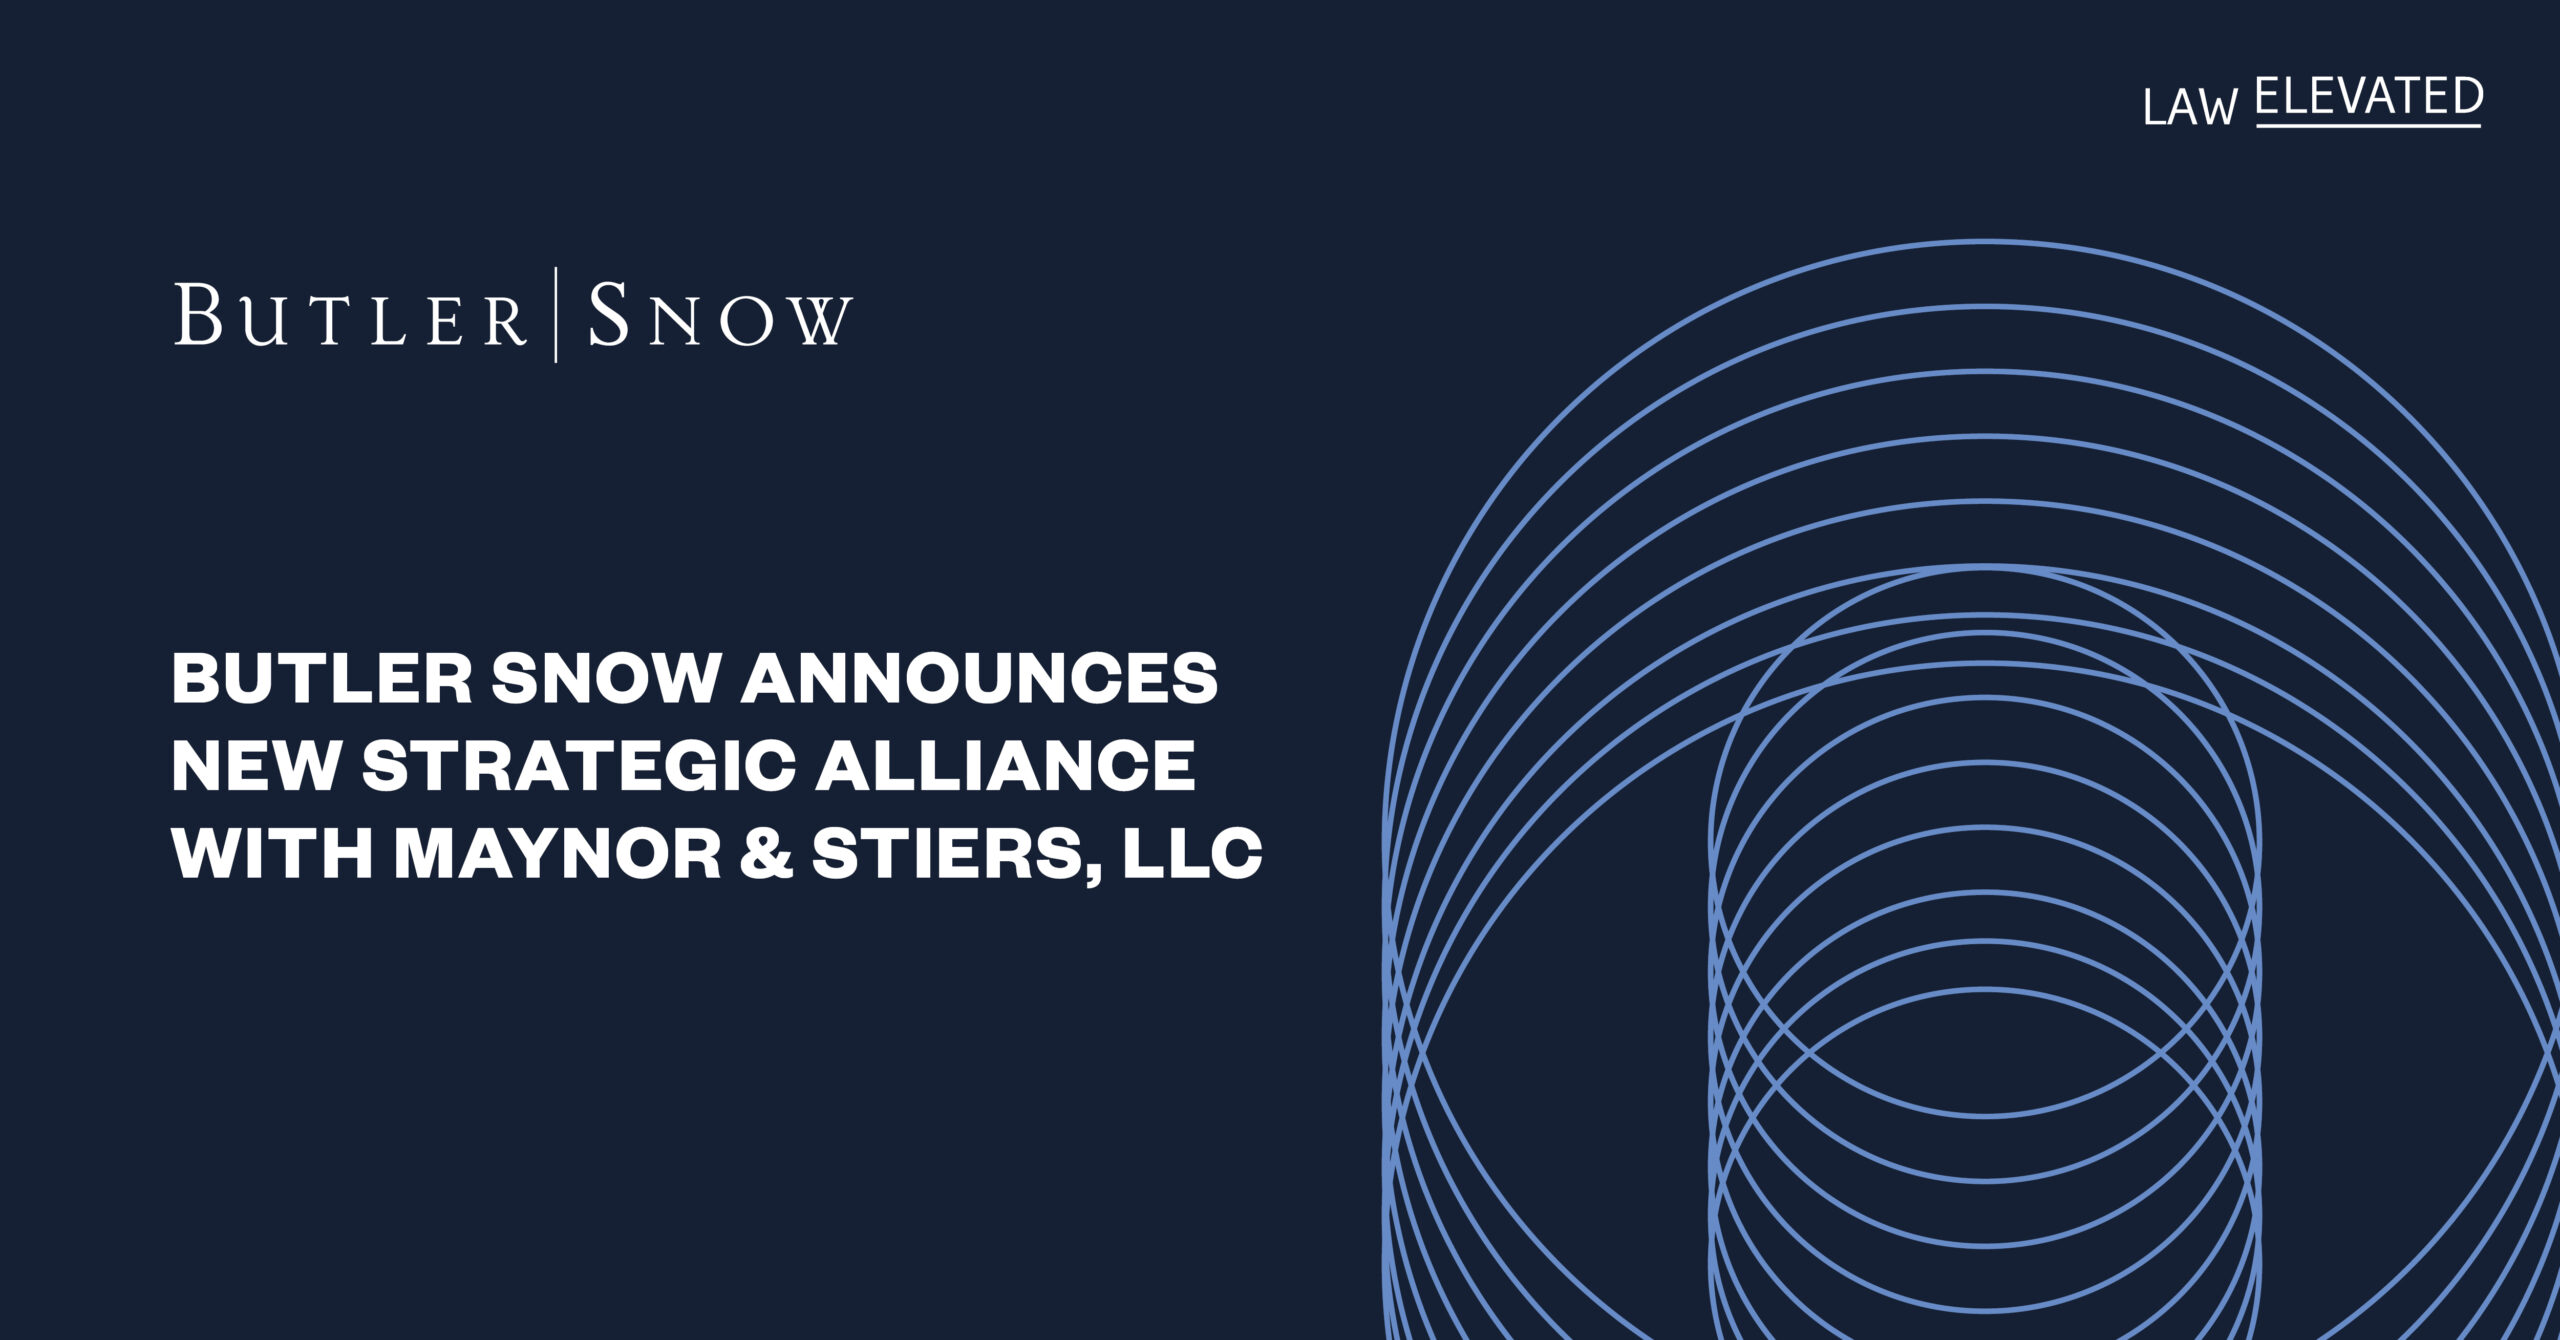 Butler Snow Announces New Strategic Alliance with Maynor & Stiers, LLC